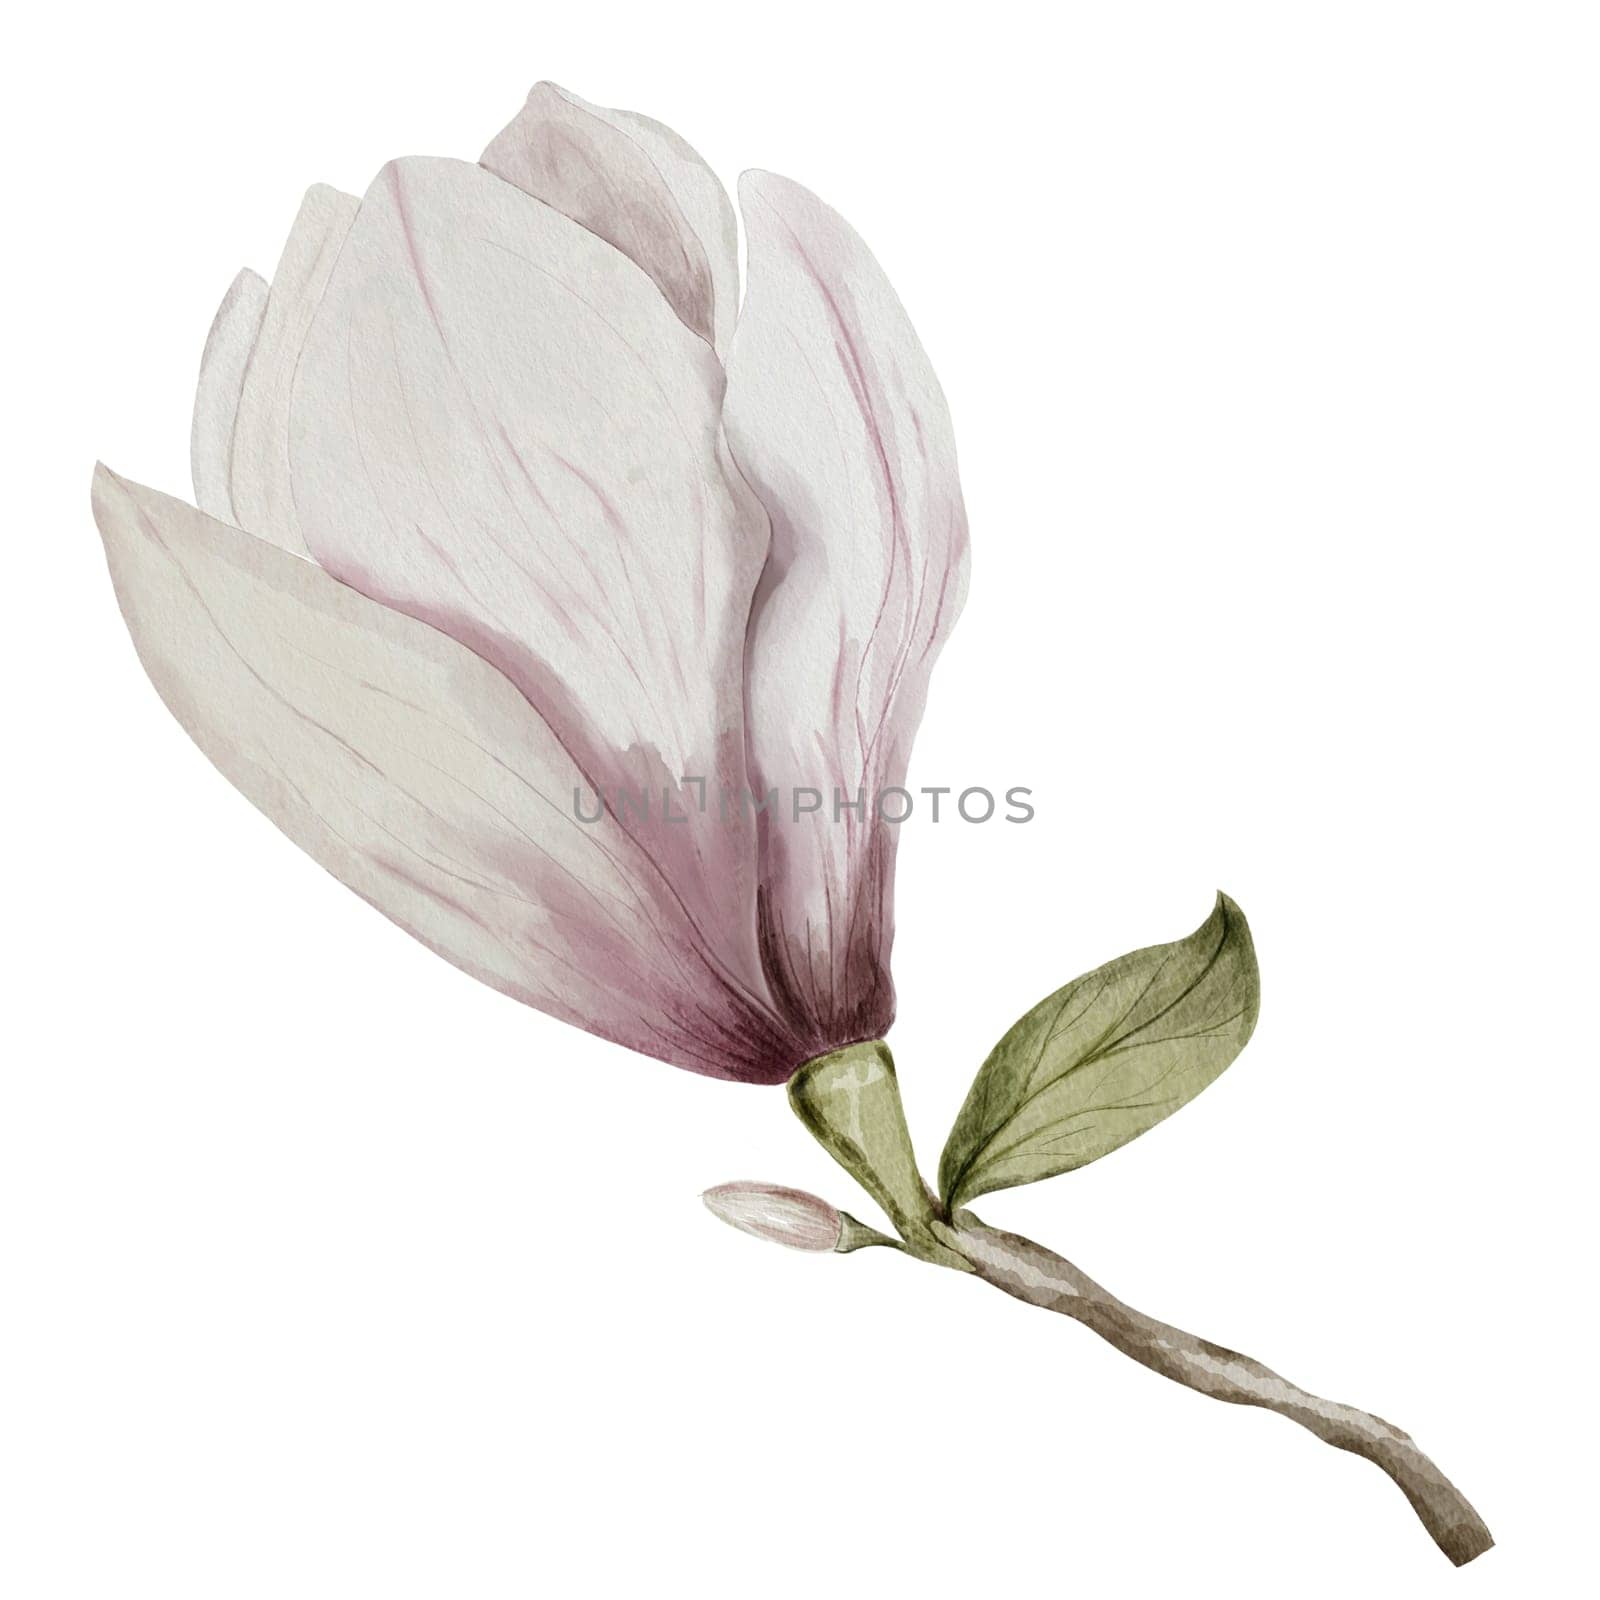 Watercolor magnolia flower isolate on a white background. Vintage flower in pink and white colors for design of cards and invitations for weddings and engagements.